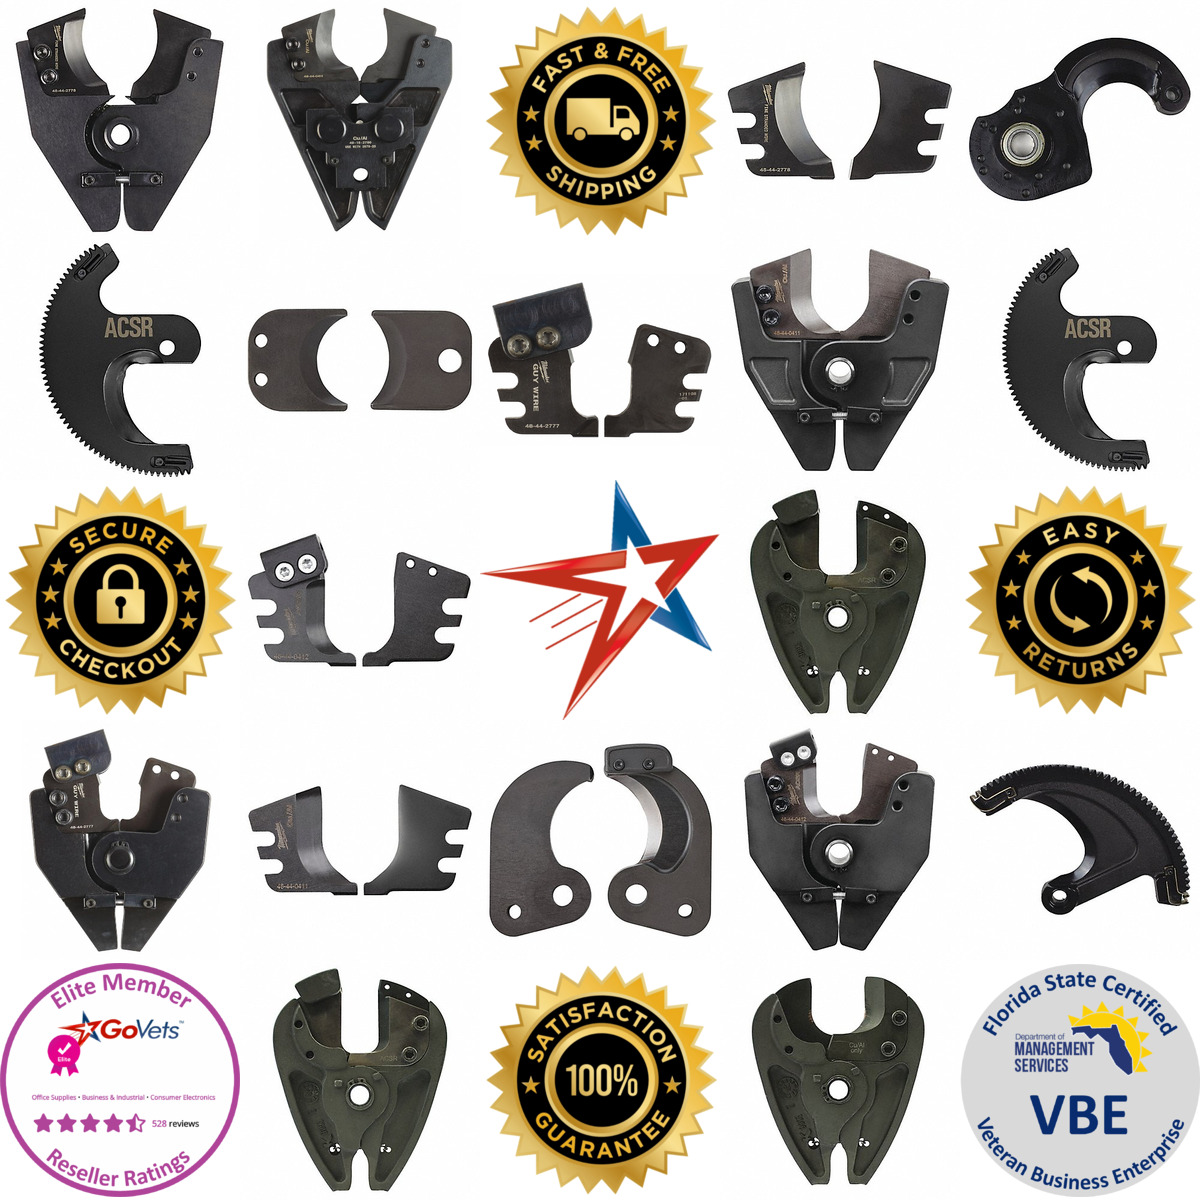 A selection of Cable and Wire Cutter Jaws and Blades products on GoVets